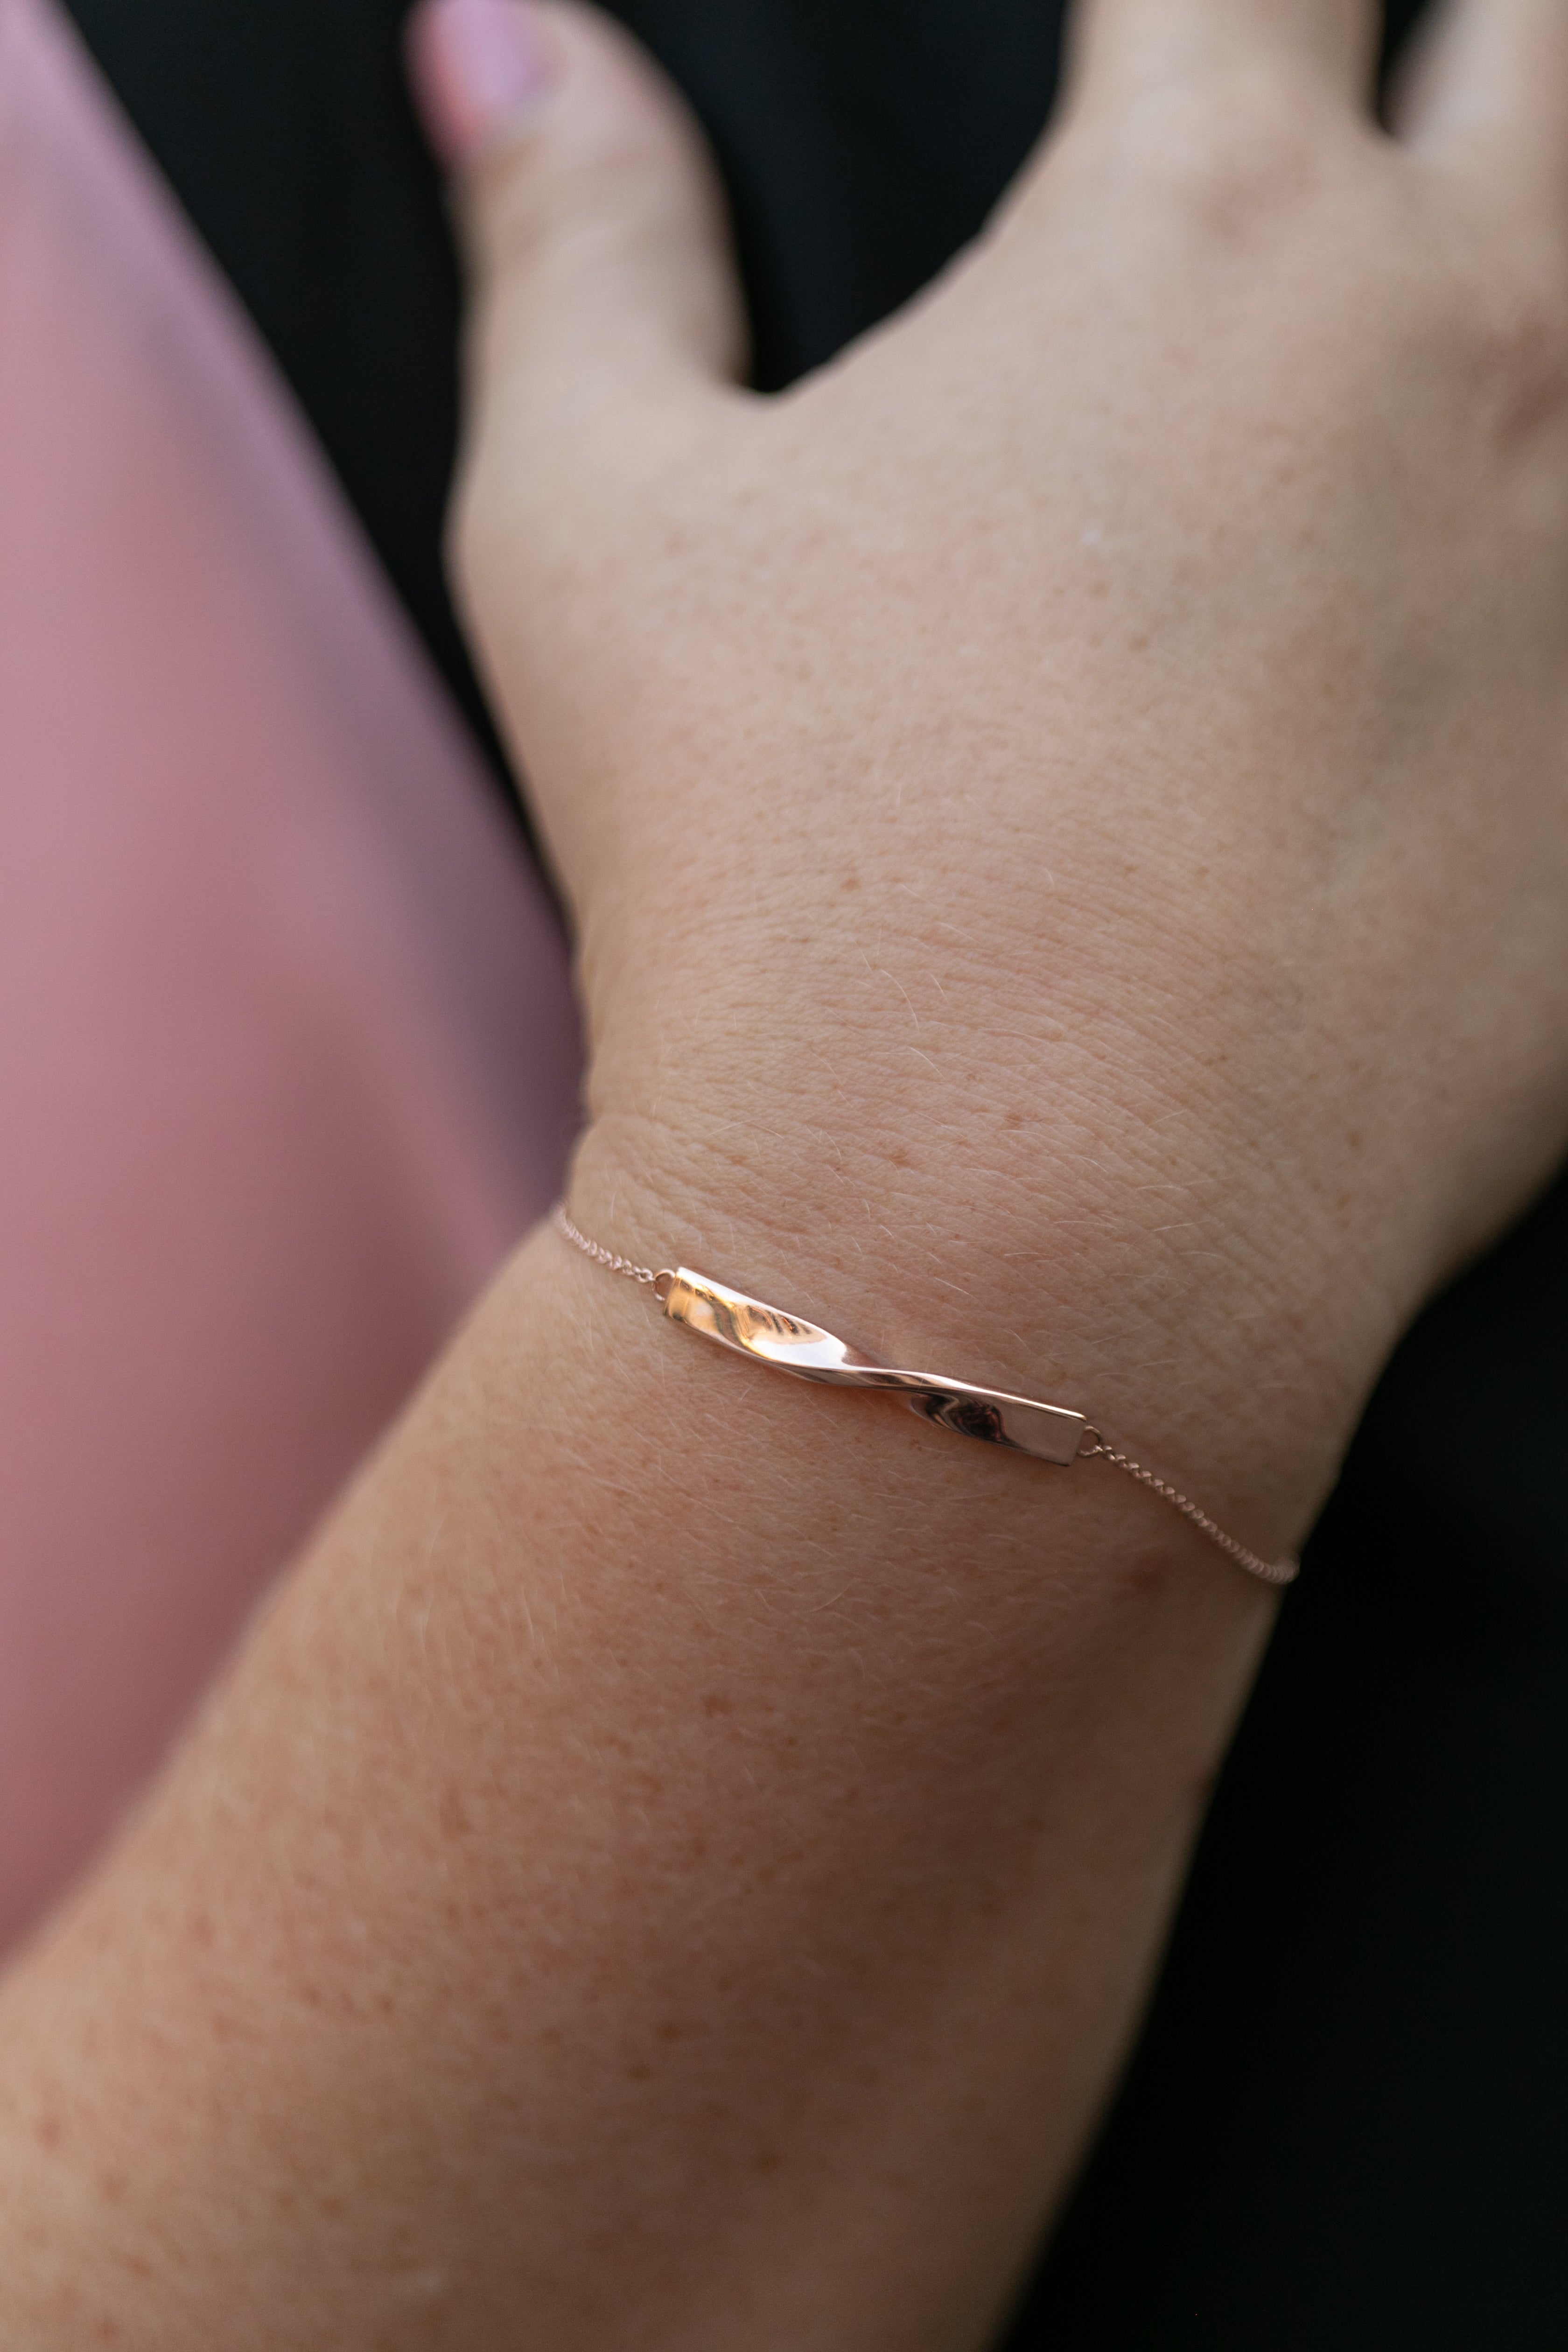 a close up shot of a rose gold twist bracelet on a person wearing black and pink.